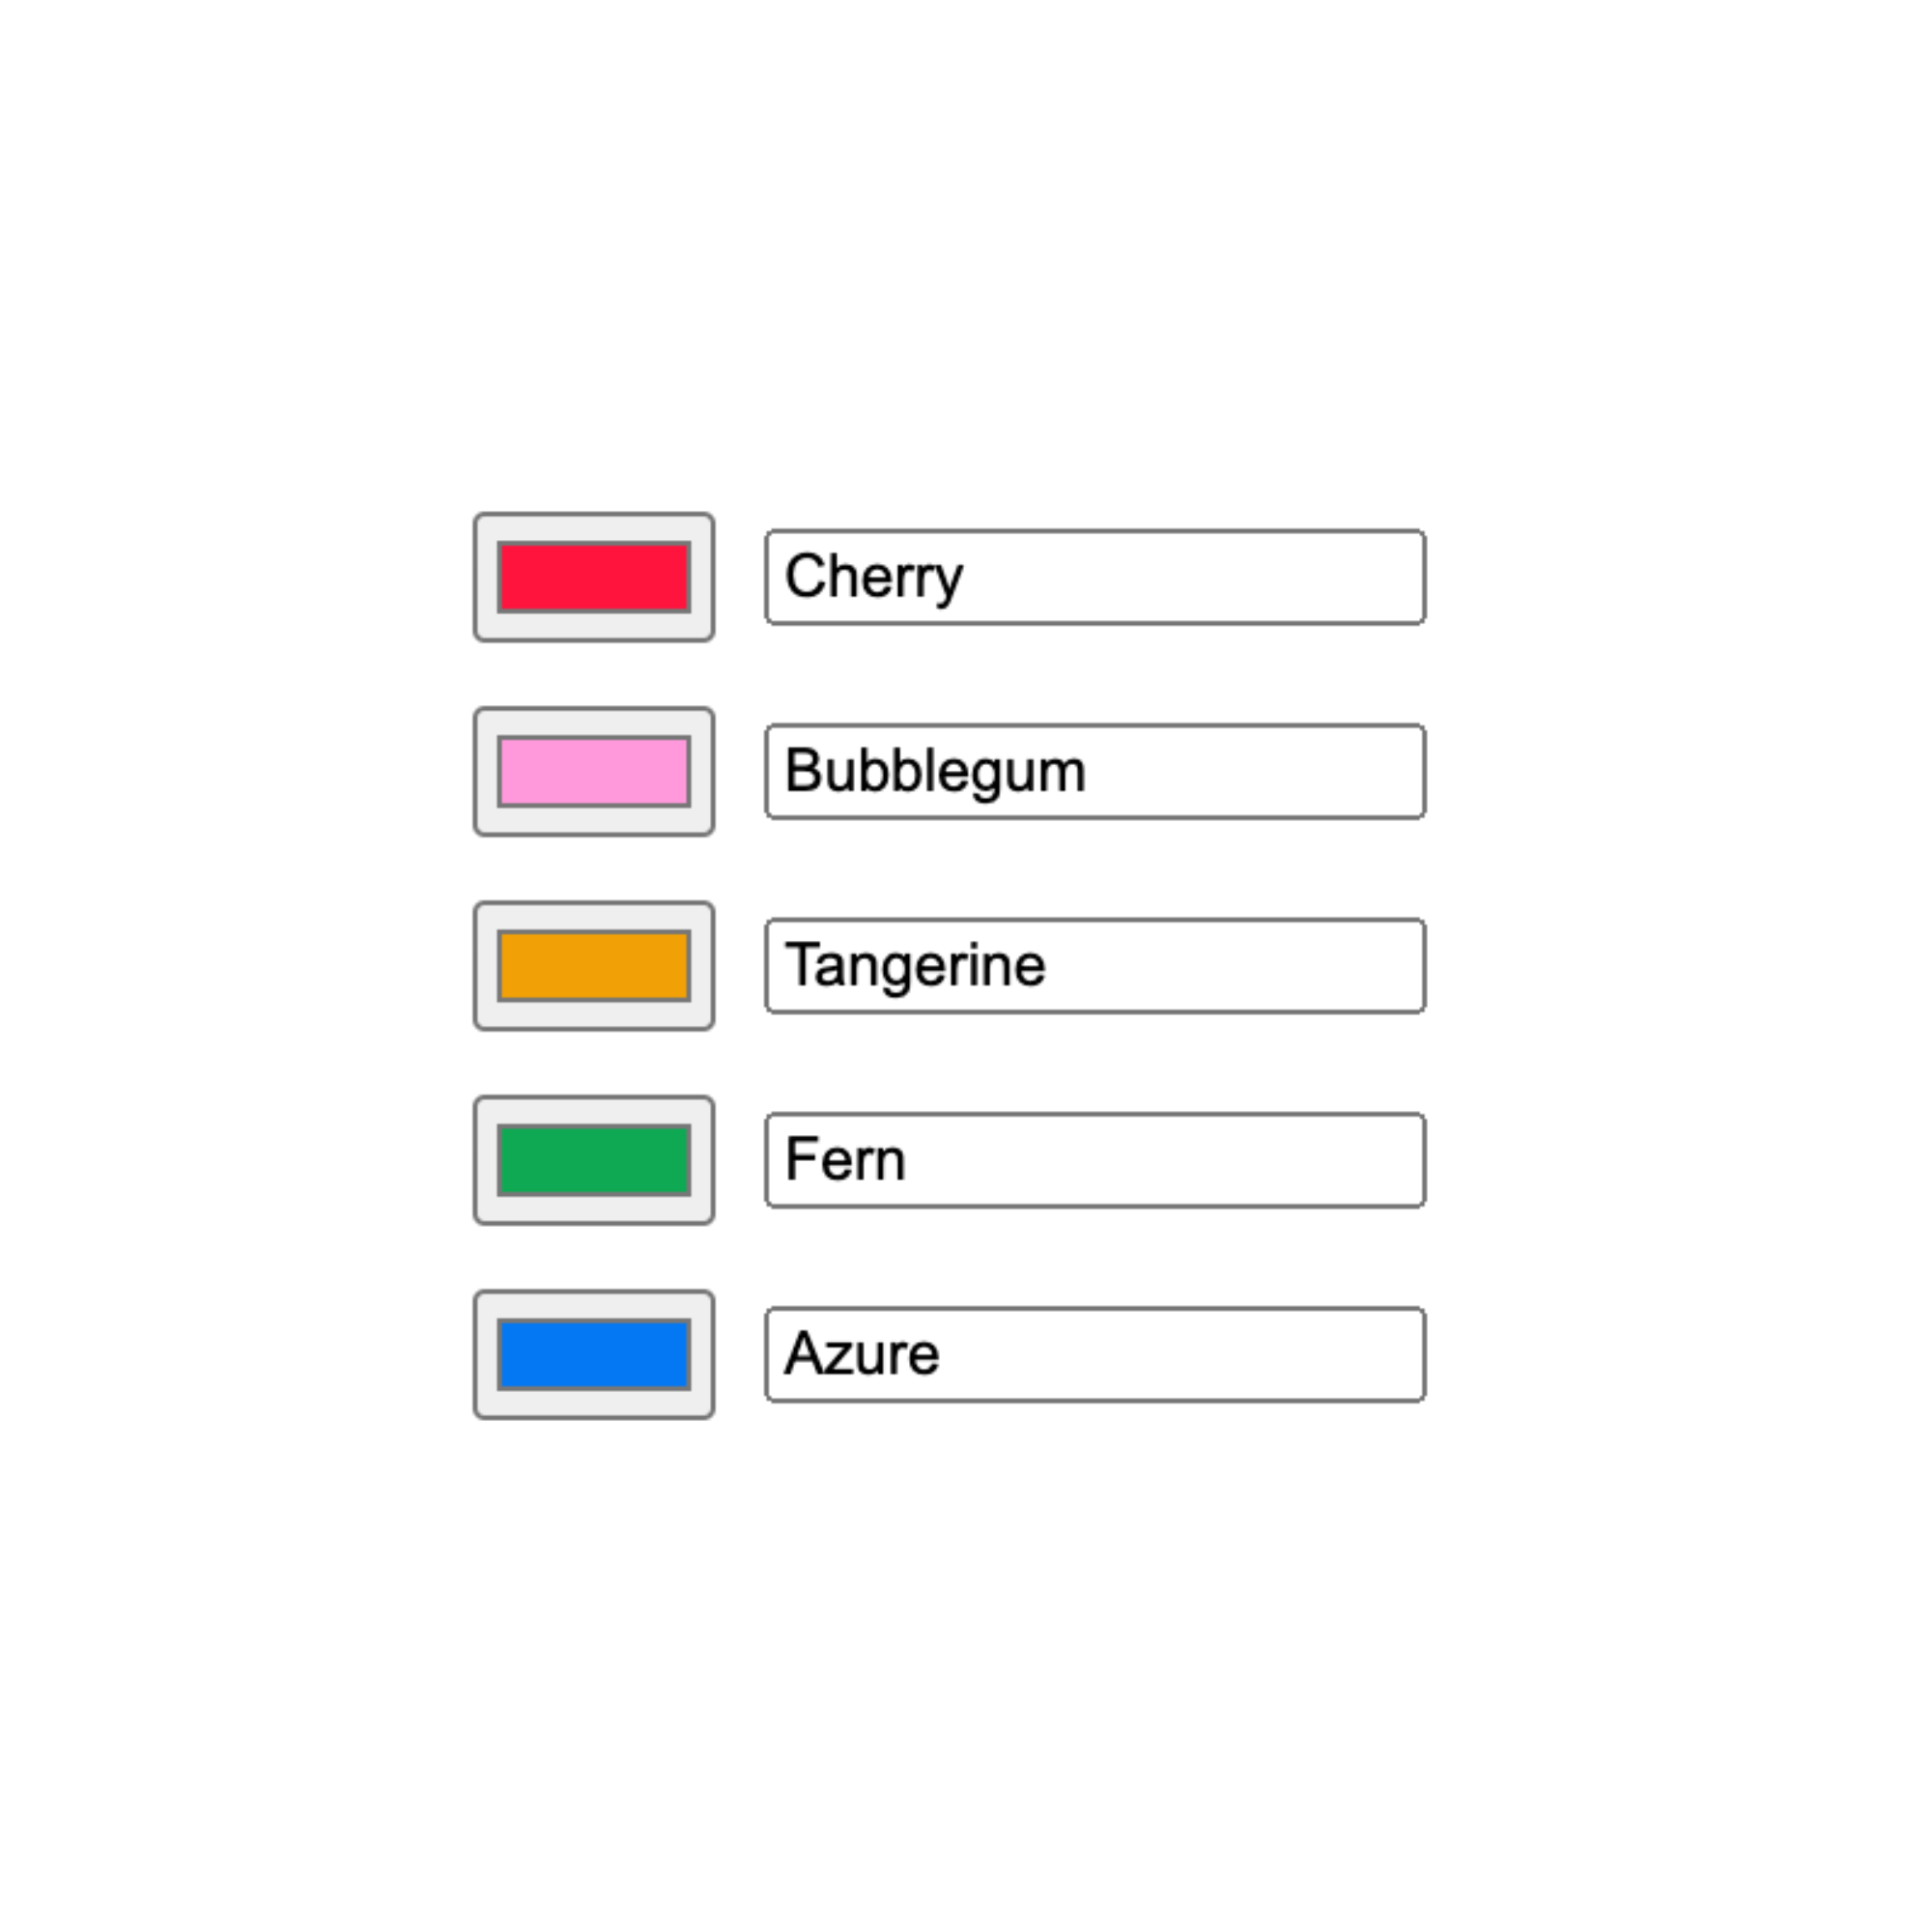 A preview of a brand color palette: a bright red, a bright pink, a bright yellow, a bright green, and a bright blue